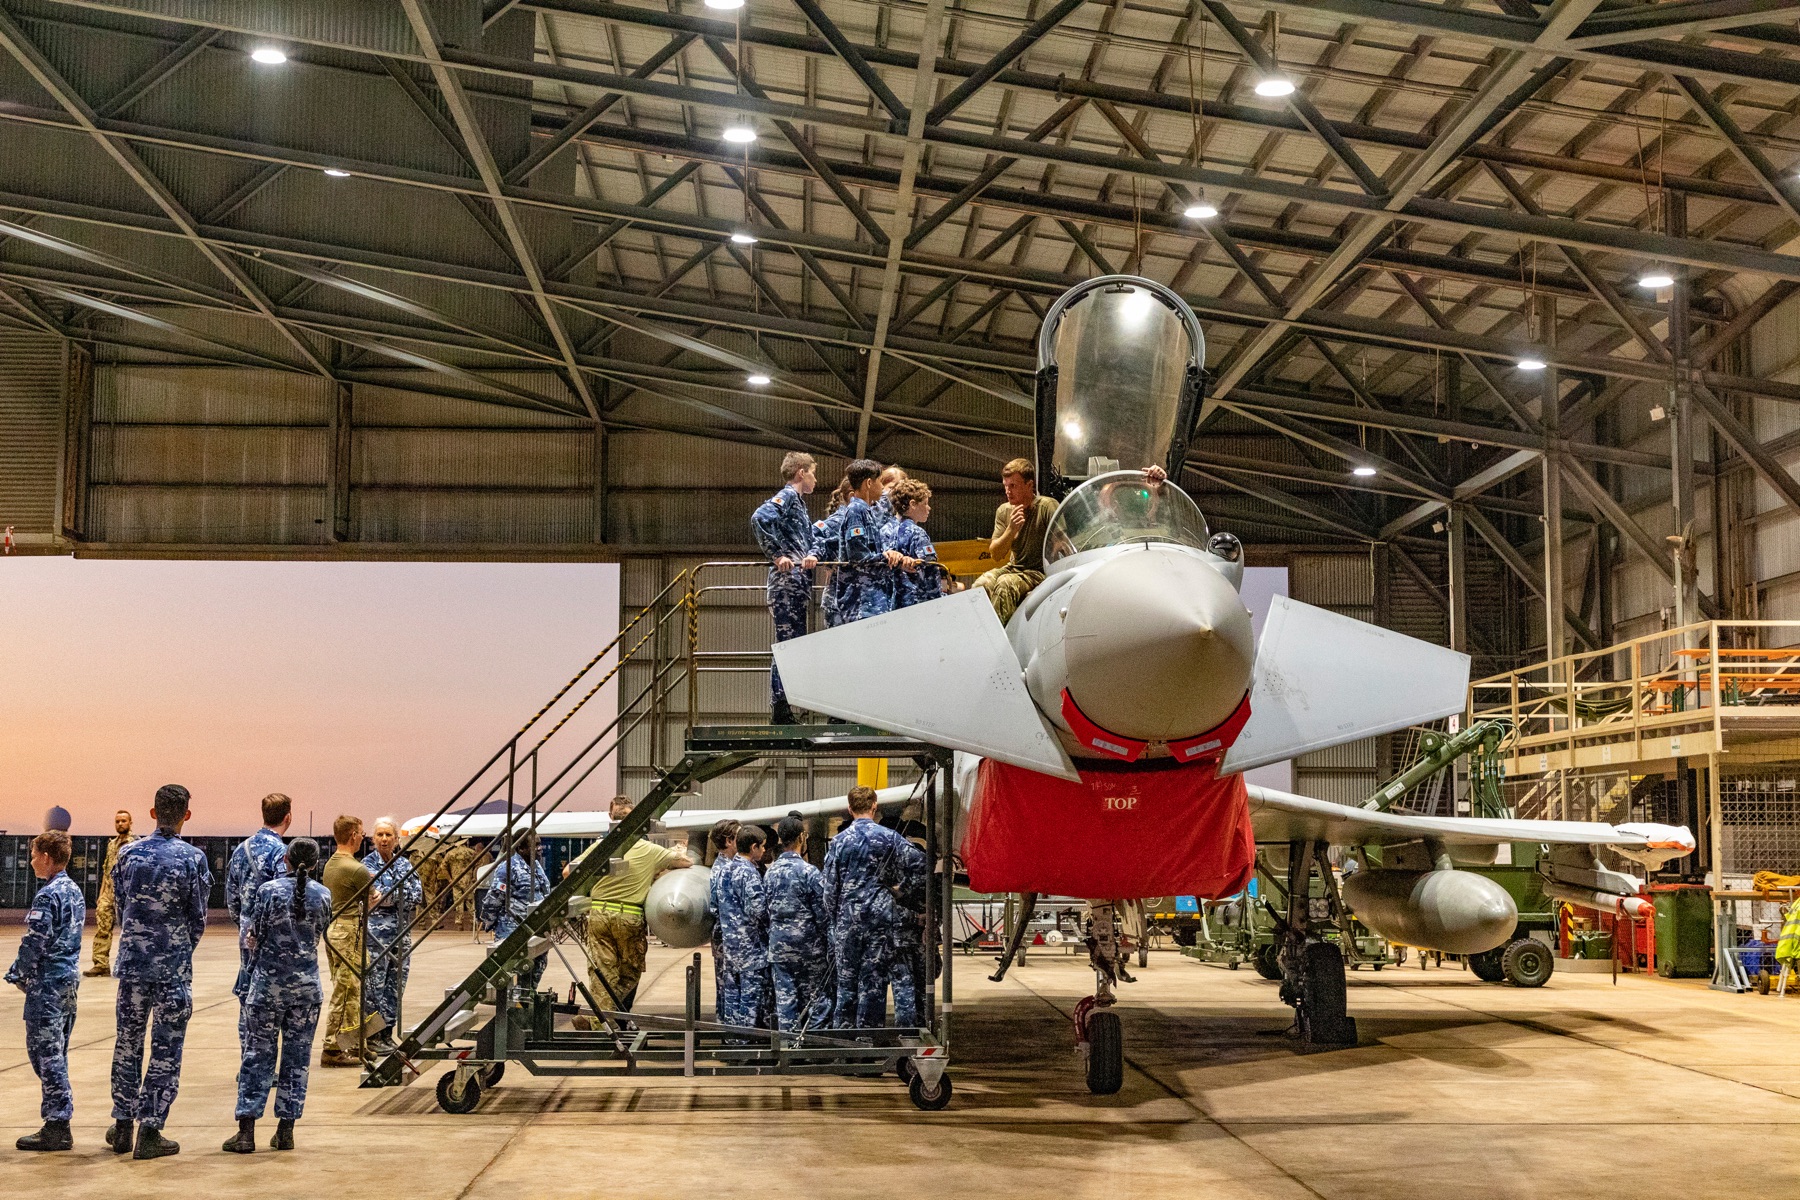 Image shows RAF aviators and Royal Australian Air Force personnel in hangar with Typhoon.